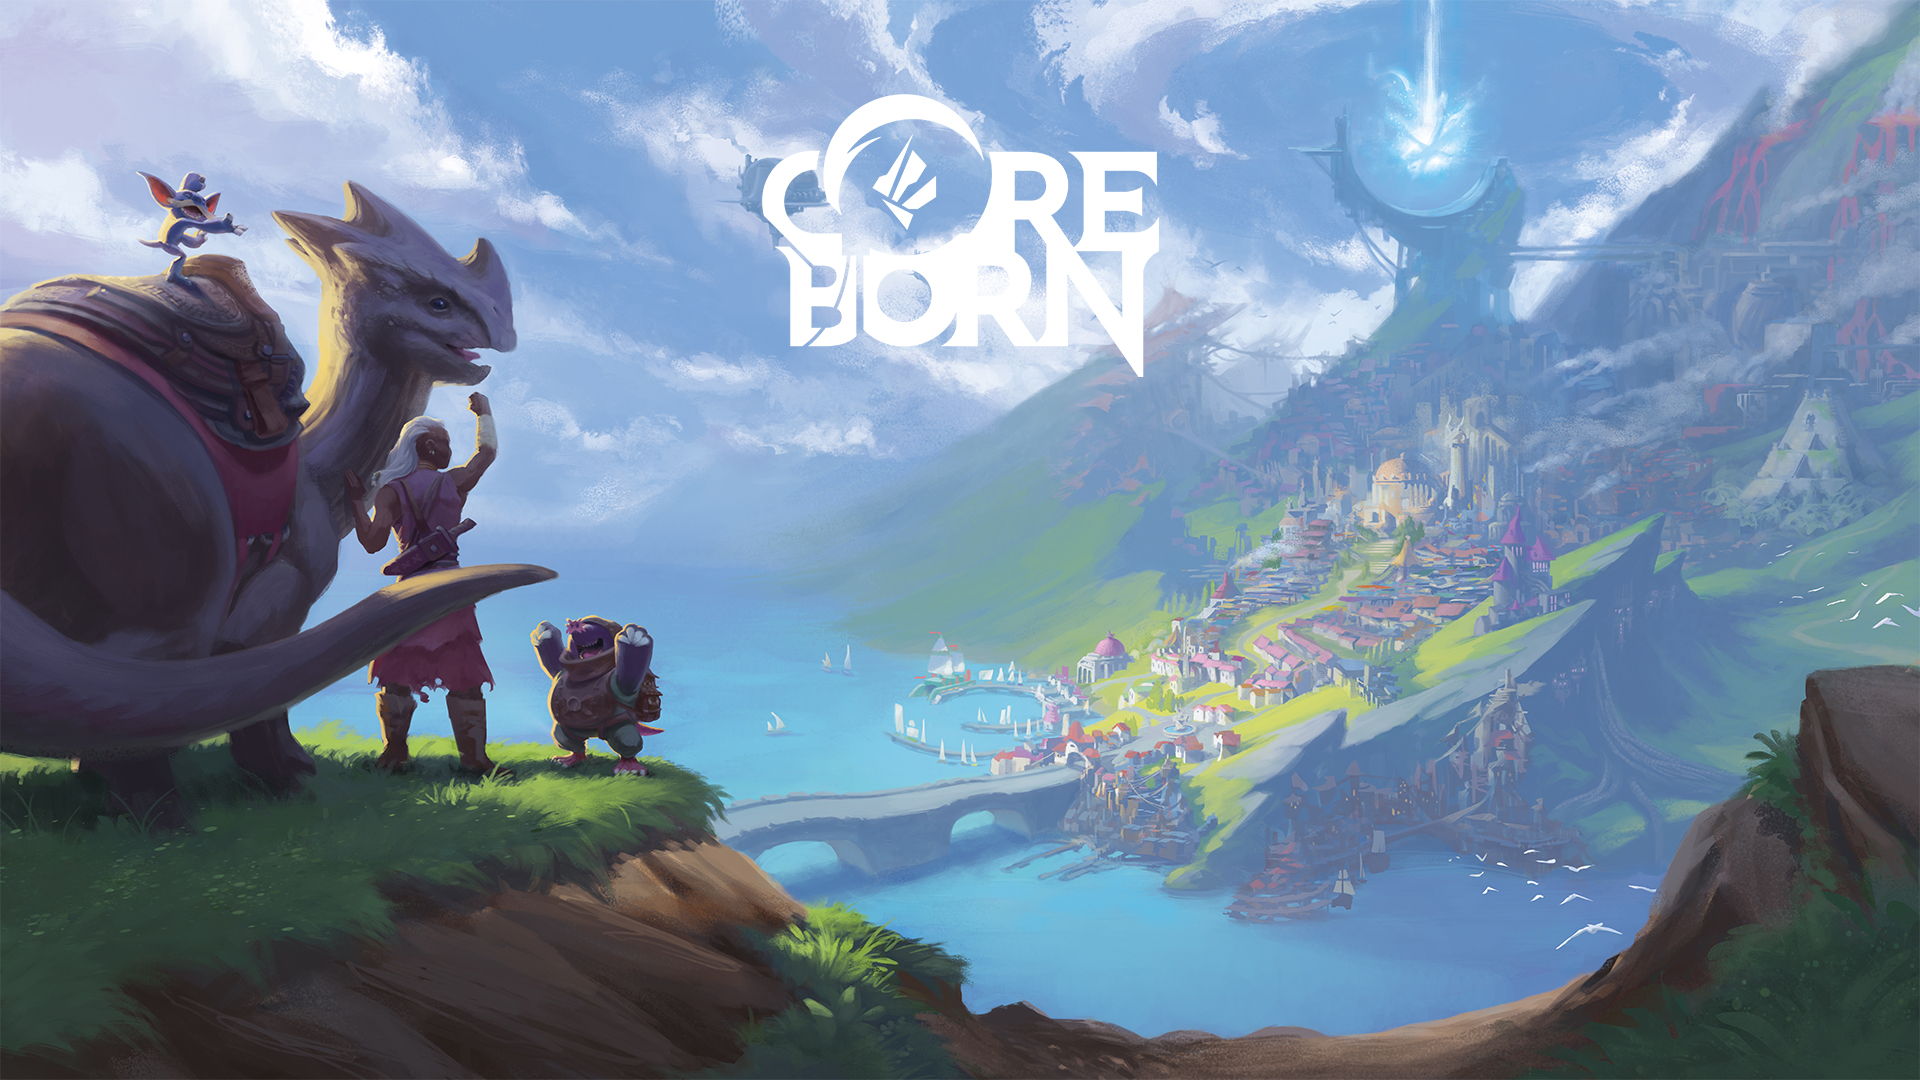 Build, Loot, and Survive Together in Coreborn: Nations of the Ultracore